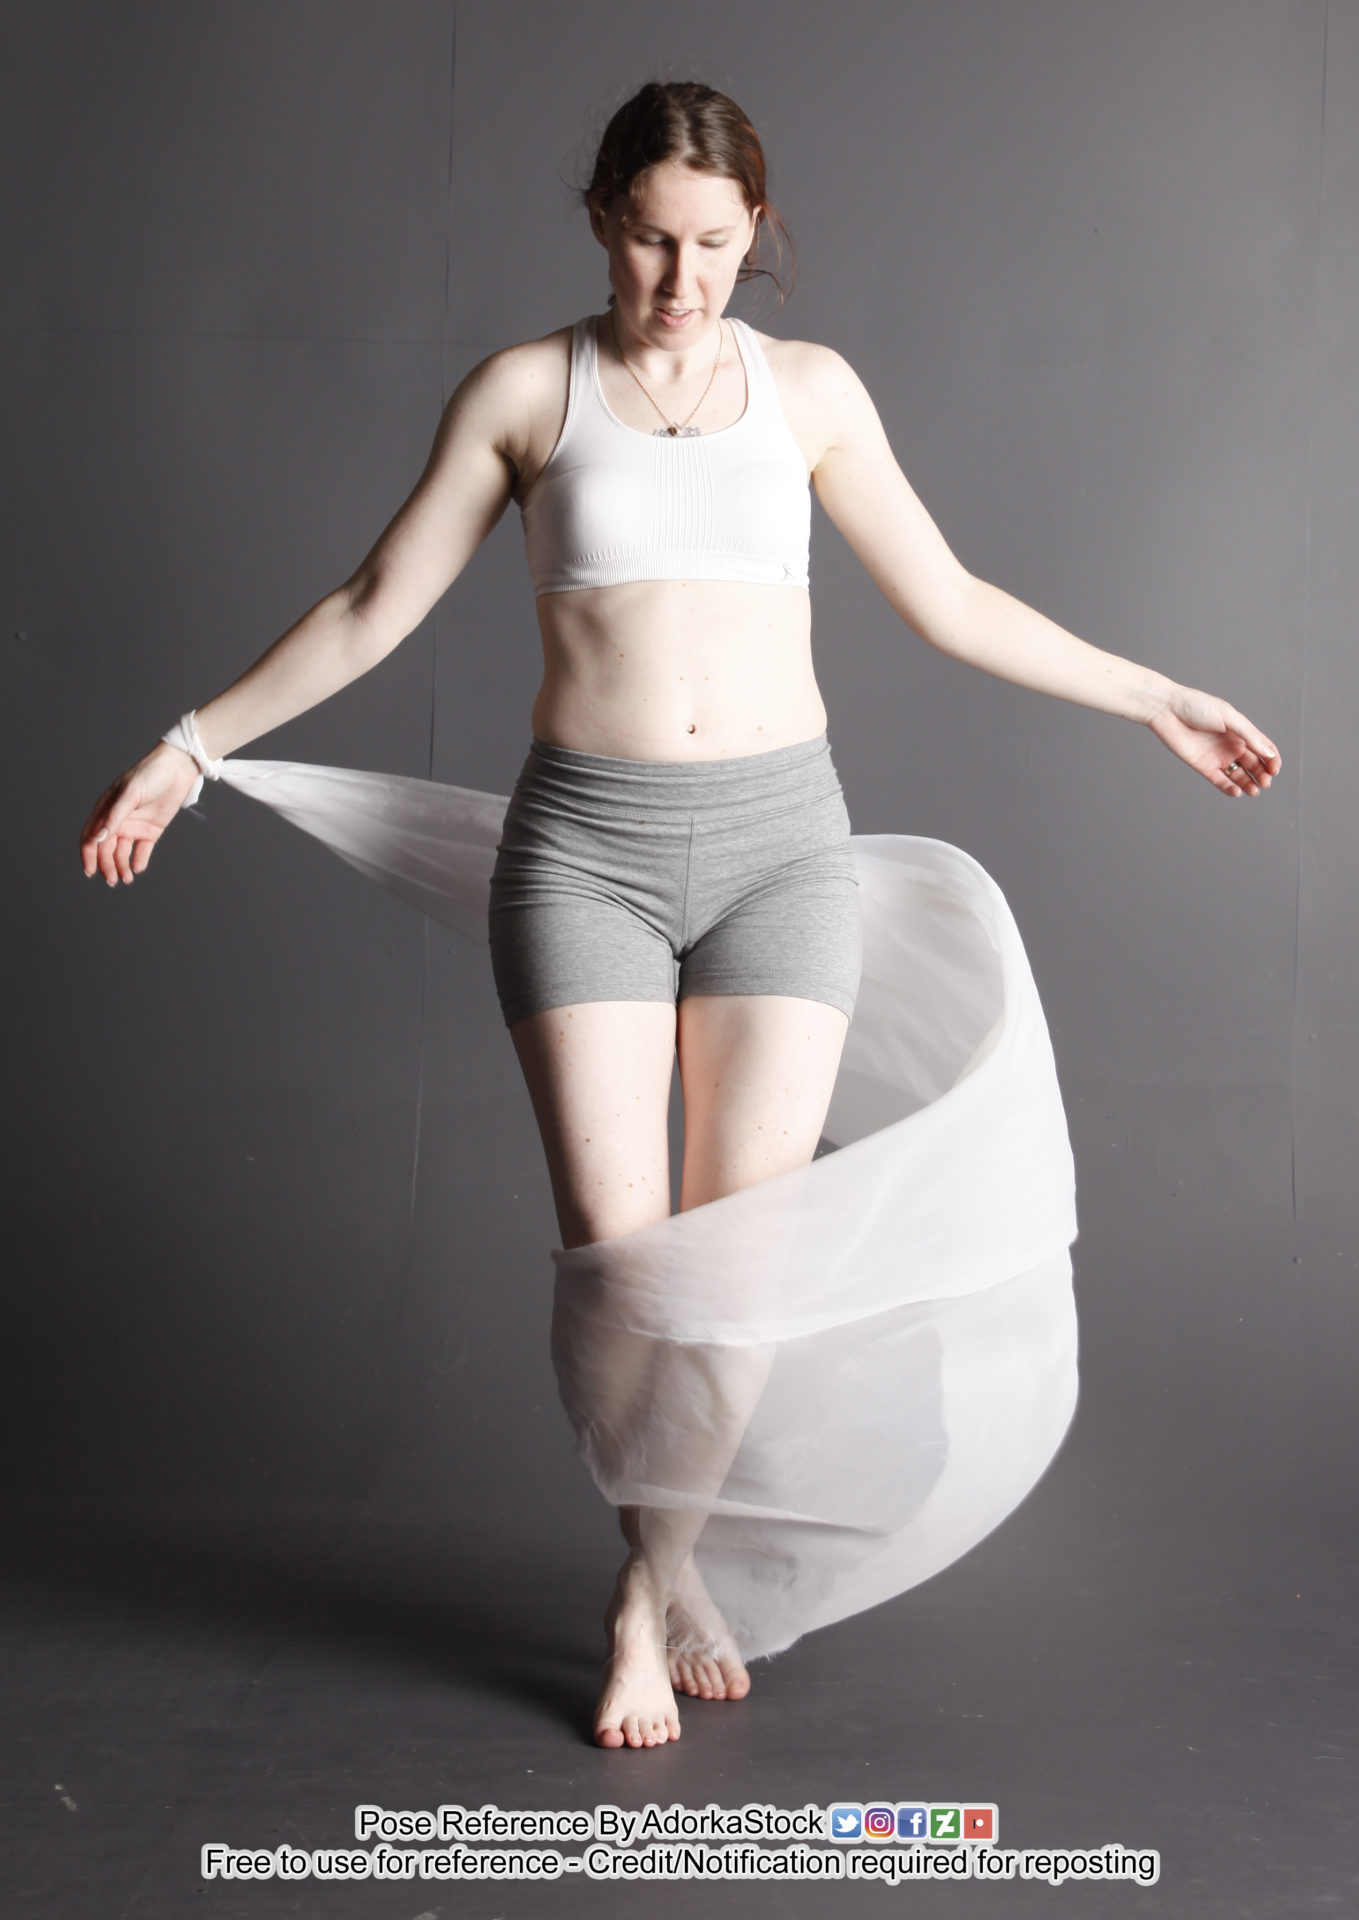 Graceful pose reference with magical white fabric